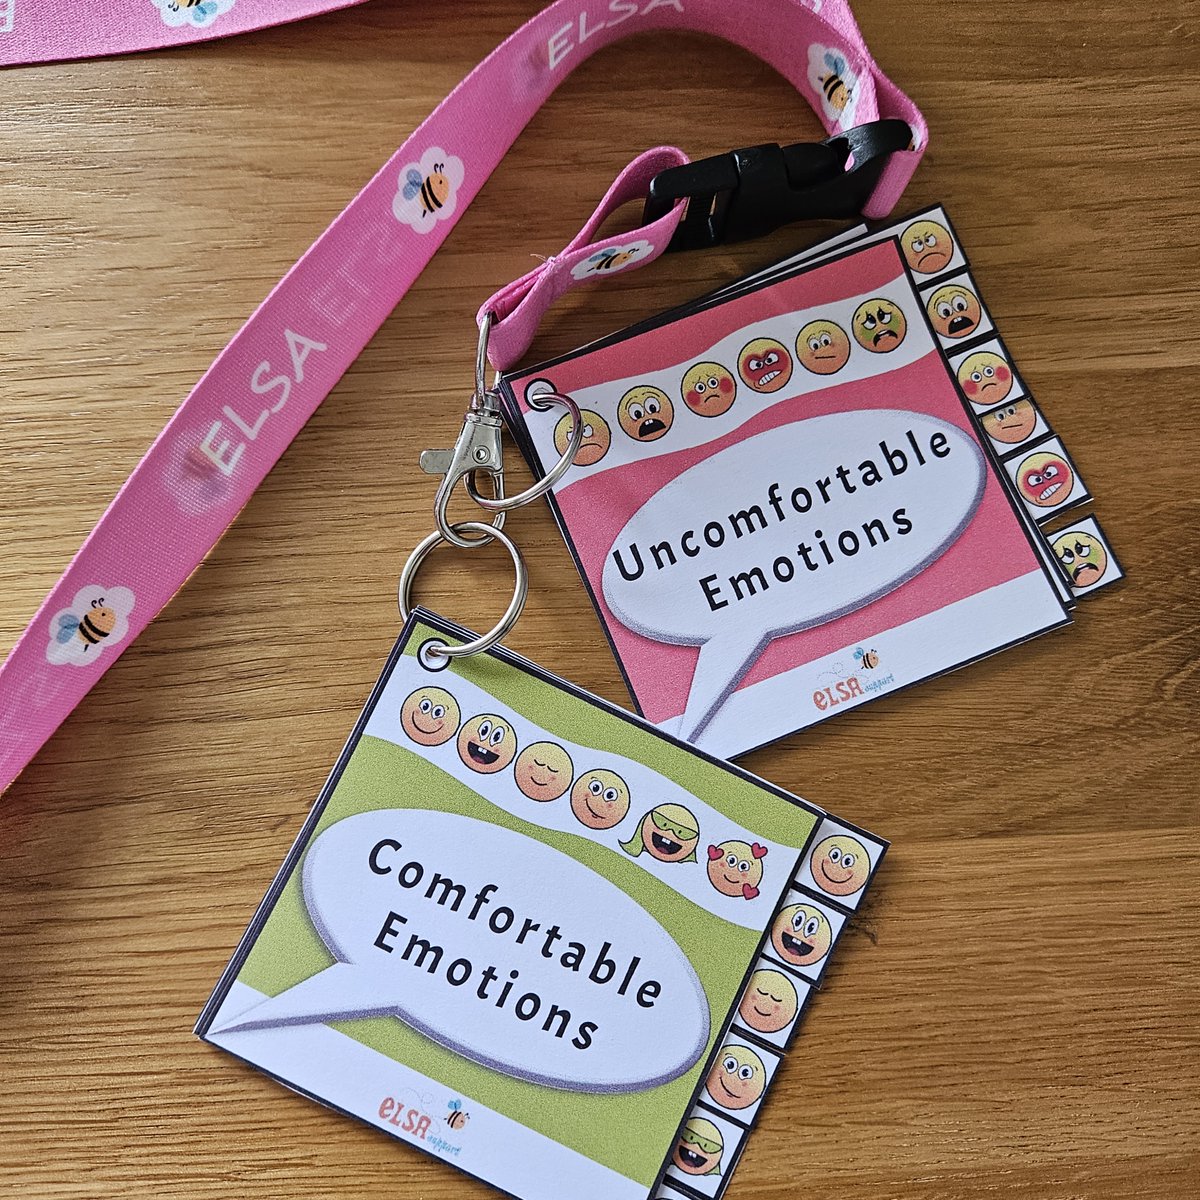 Our lovely emotion cards - perfect to go on your lanyard. These have tabs so you can easily find the one you want. #elsasupport #emotionalliteracy #emotions #teacherresources elsa-support.co.uk/resources/tabb…